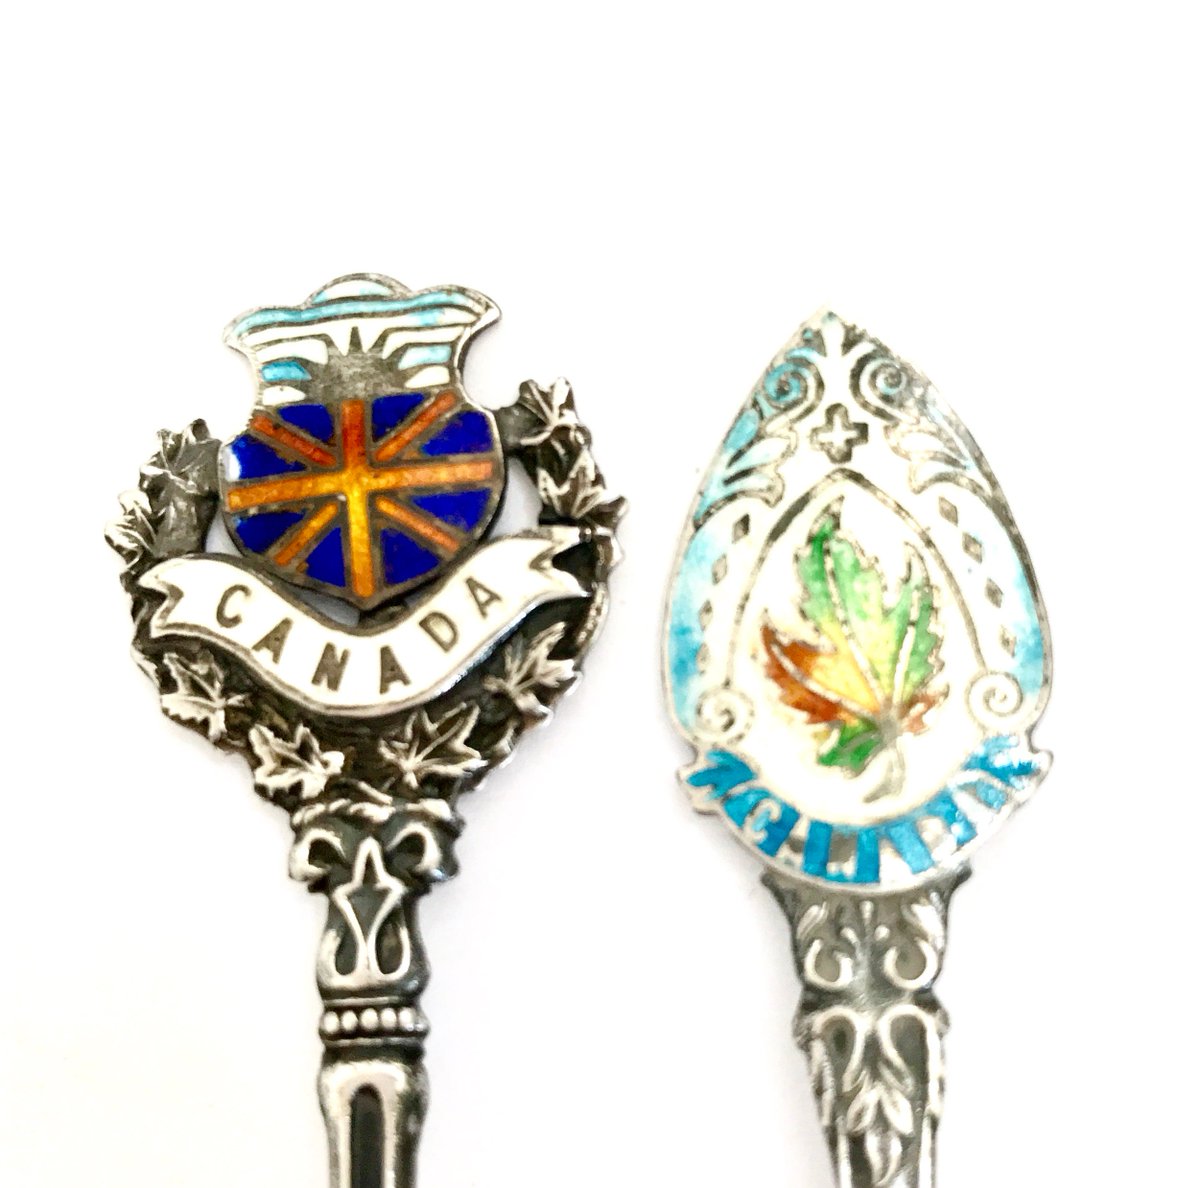 Sterling Silver & Enamel Souvenir Spoons, Vancouver, Prince Rupert B.C. Maple Leaf, Intricate Details, Canadian Marks, Collectible Gifts #ArtCollectible #VintageSouvenir $67.20 ➤ etsy.com/listing/607746…